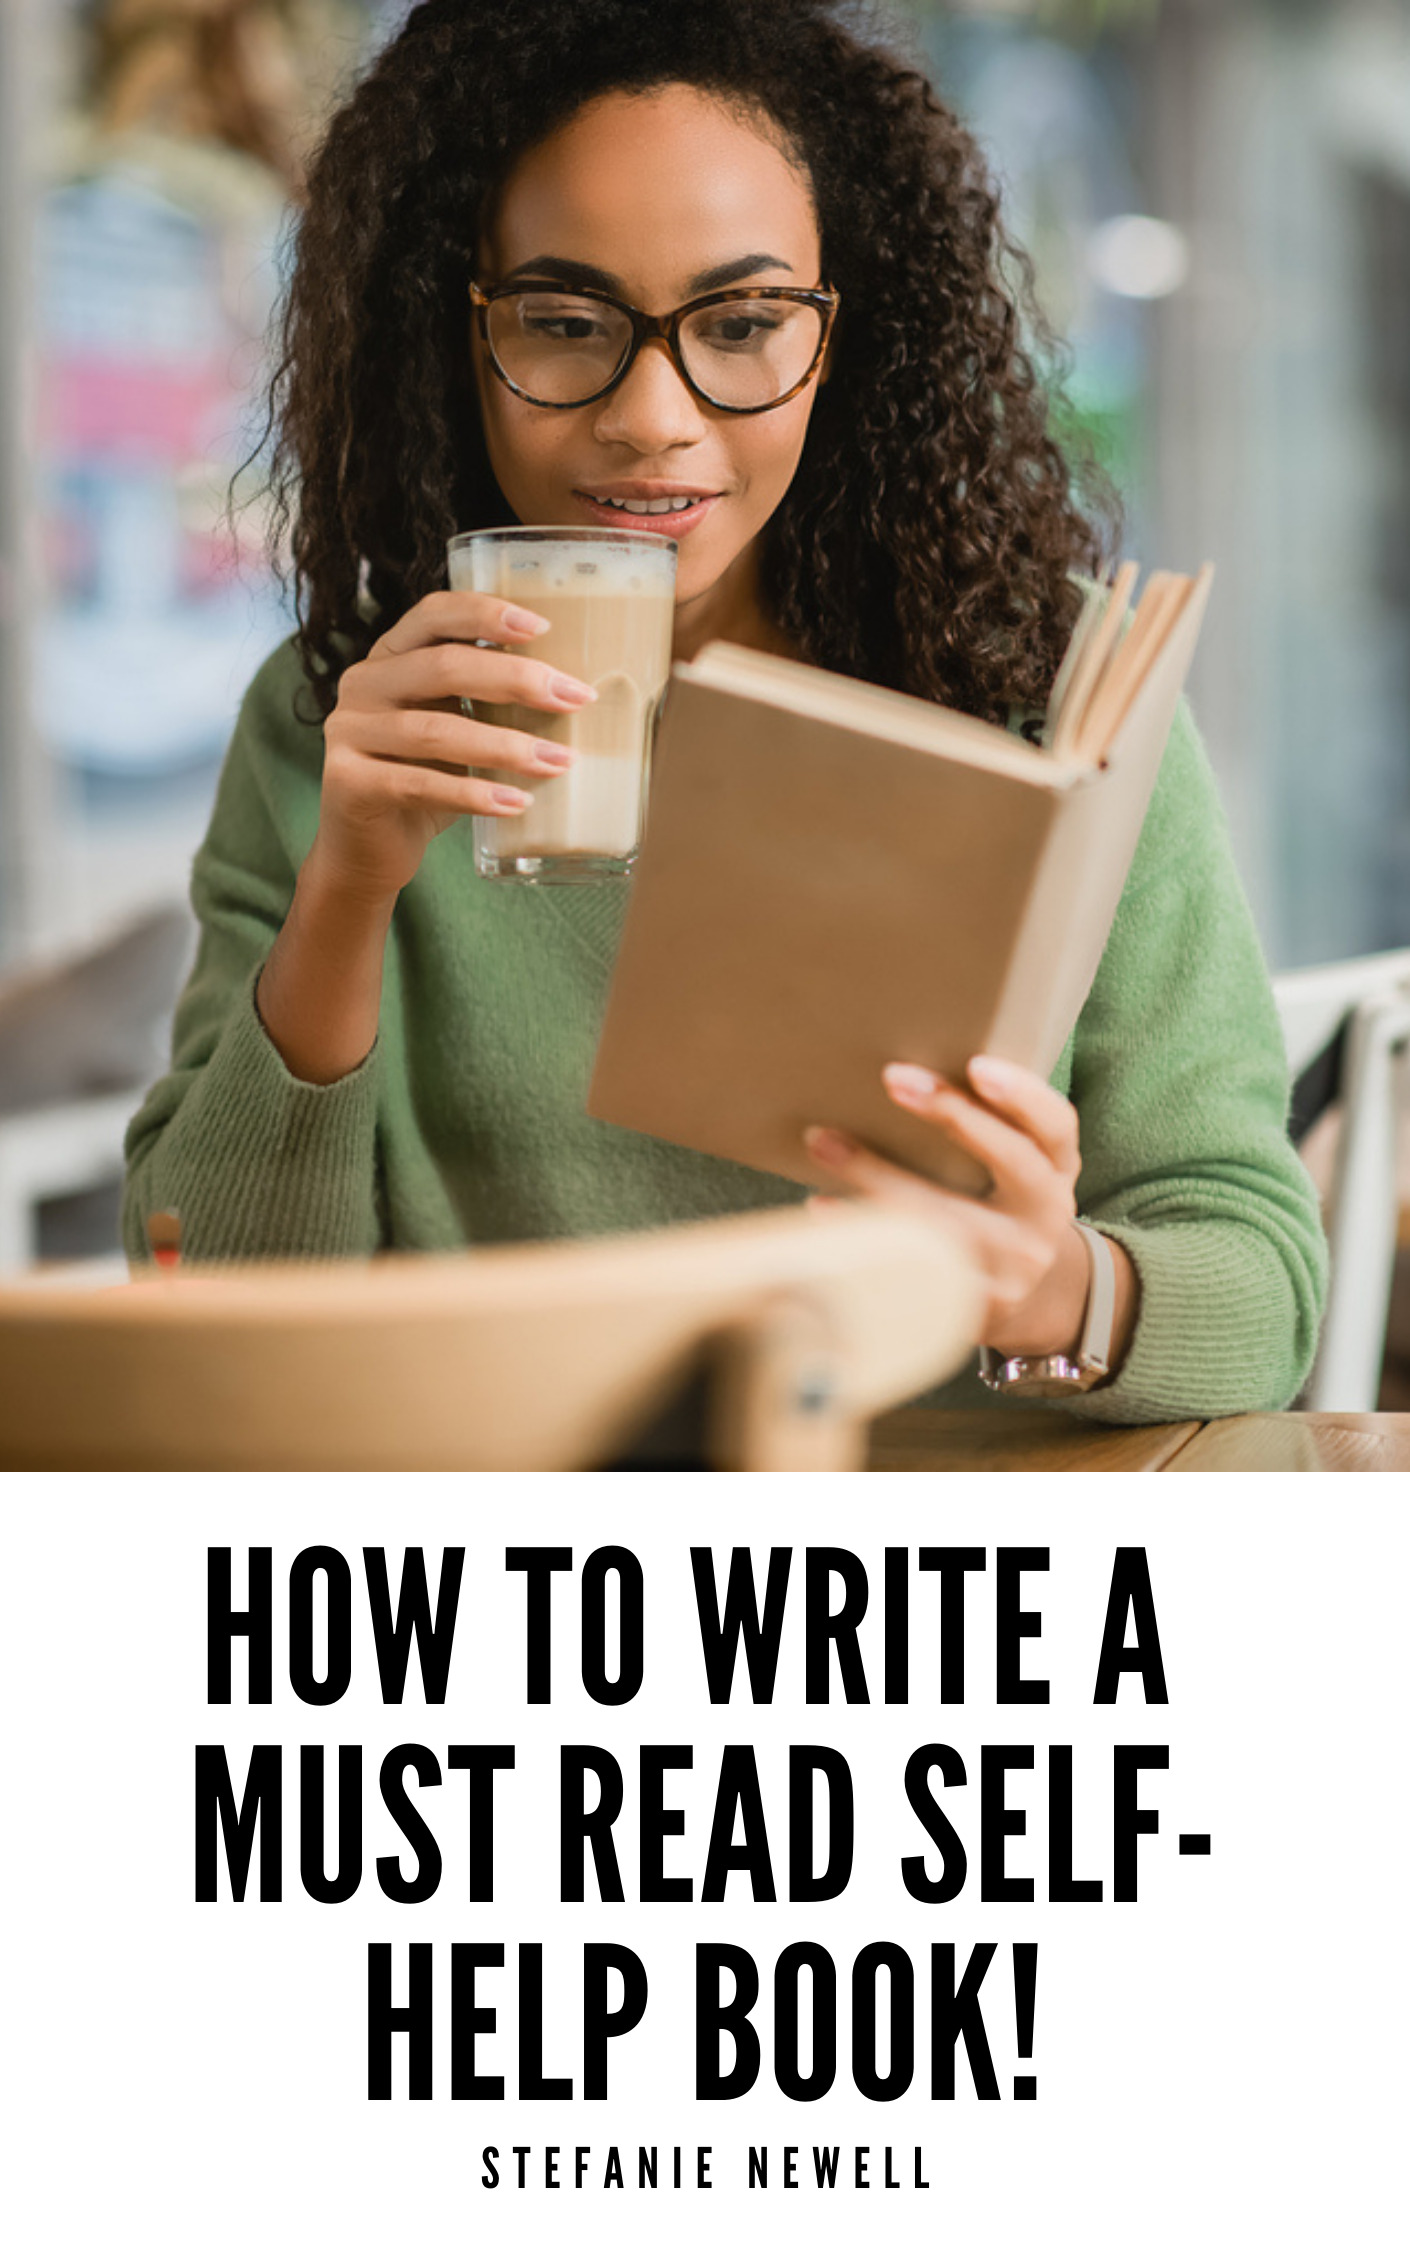 how to write a must read self-help book